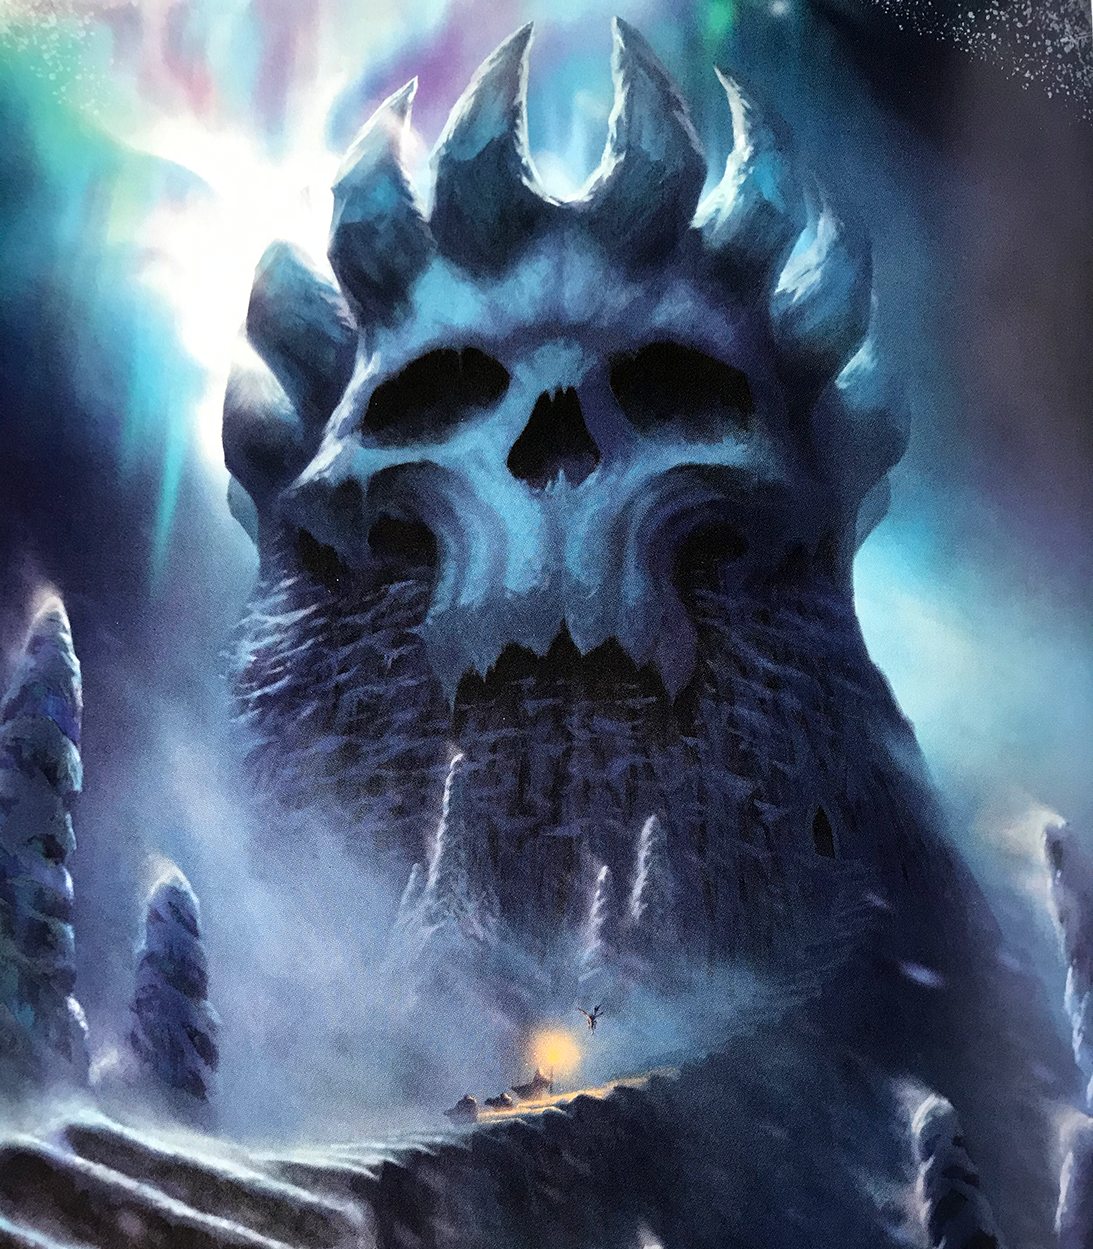 Grimskalle looms in D&D: Icewind Dale - Rime of the Frostmaiden